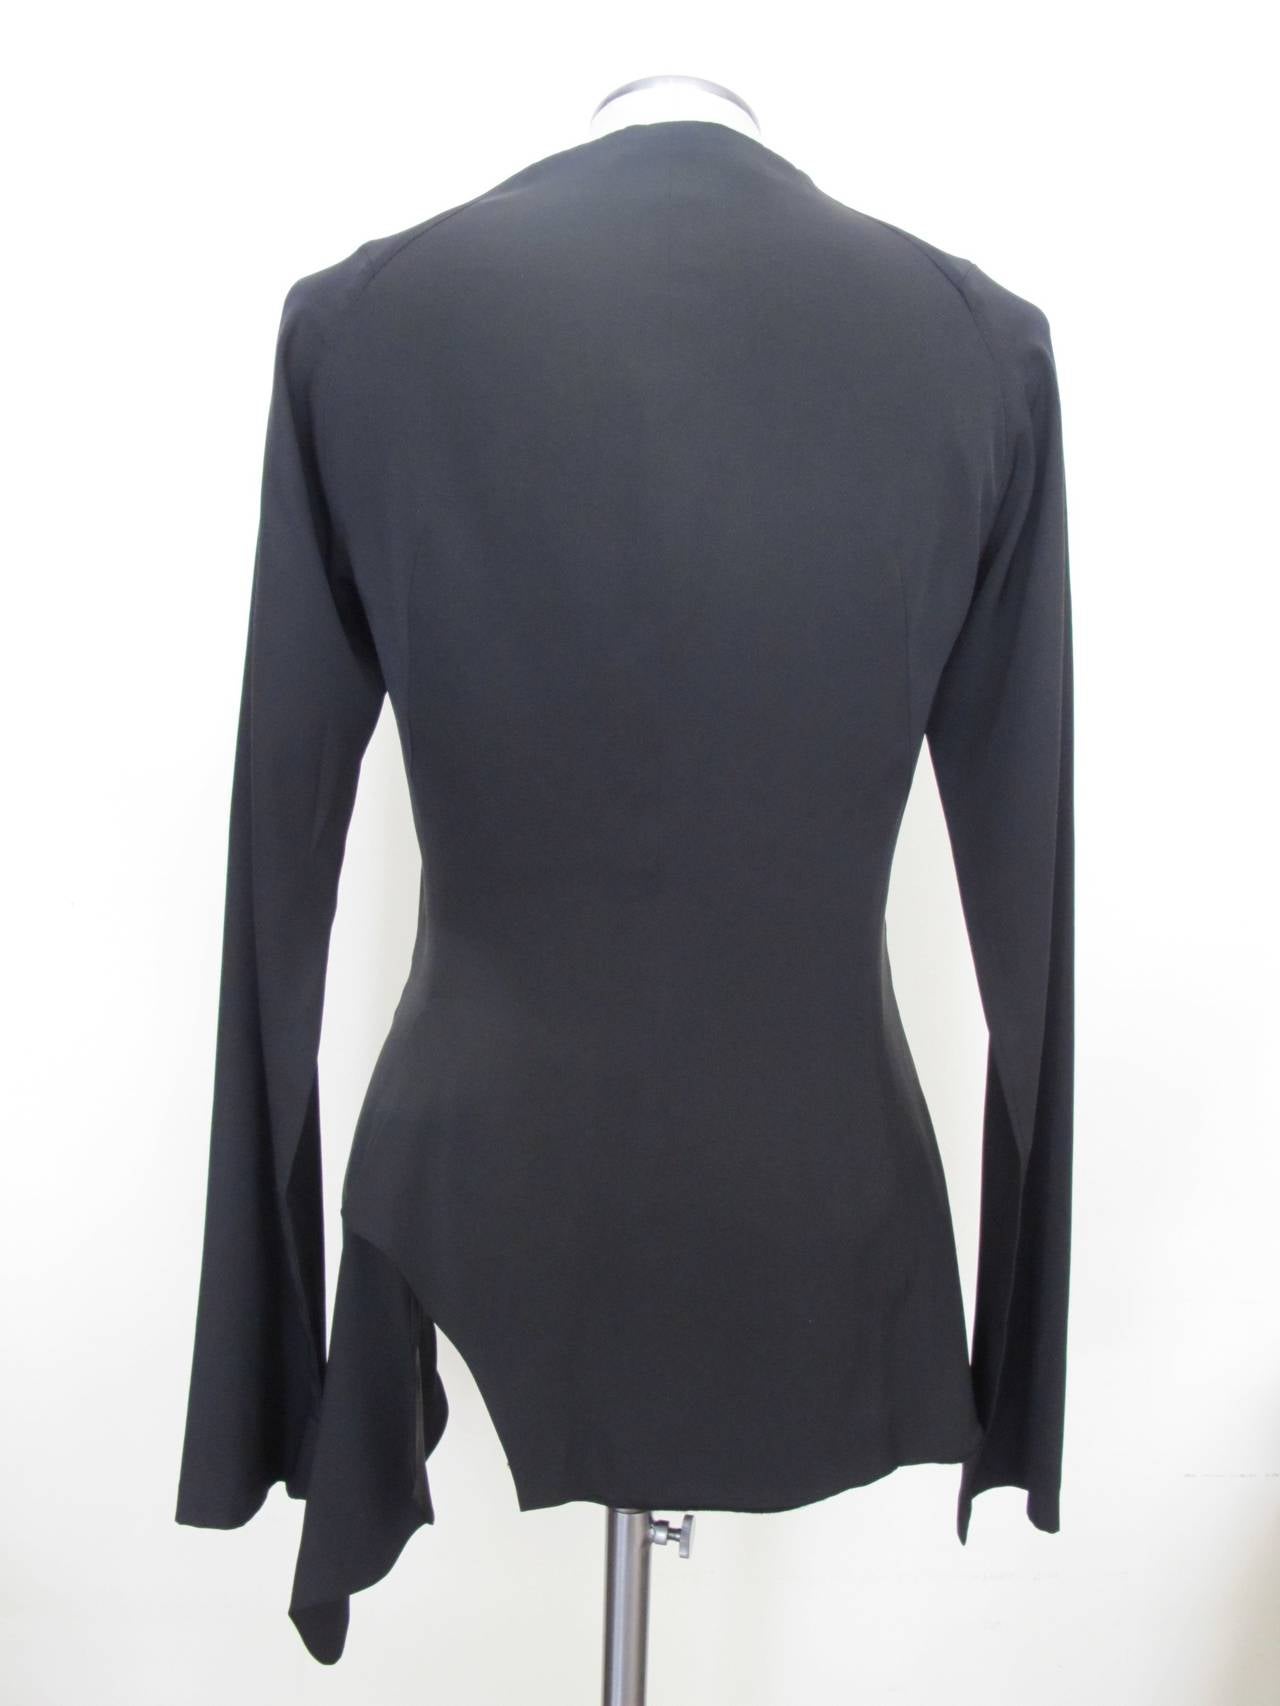 This creation of Yohji Yamamoto has raglin sleeves. It has the unique touch of one pocket which is hidden in the chic draping. The pocket has great depth. It is silk and lined with 100% soft wool. The longest part of the jacket measures 31 inches in